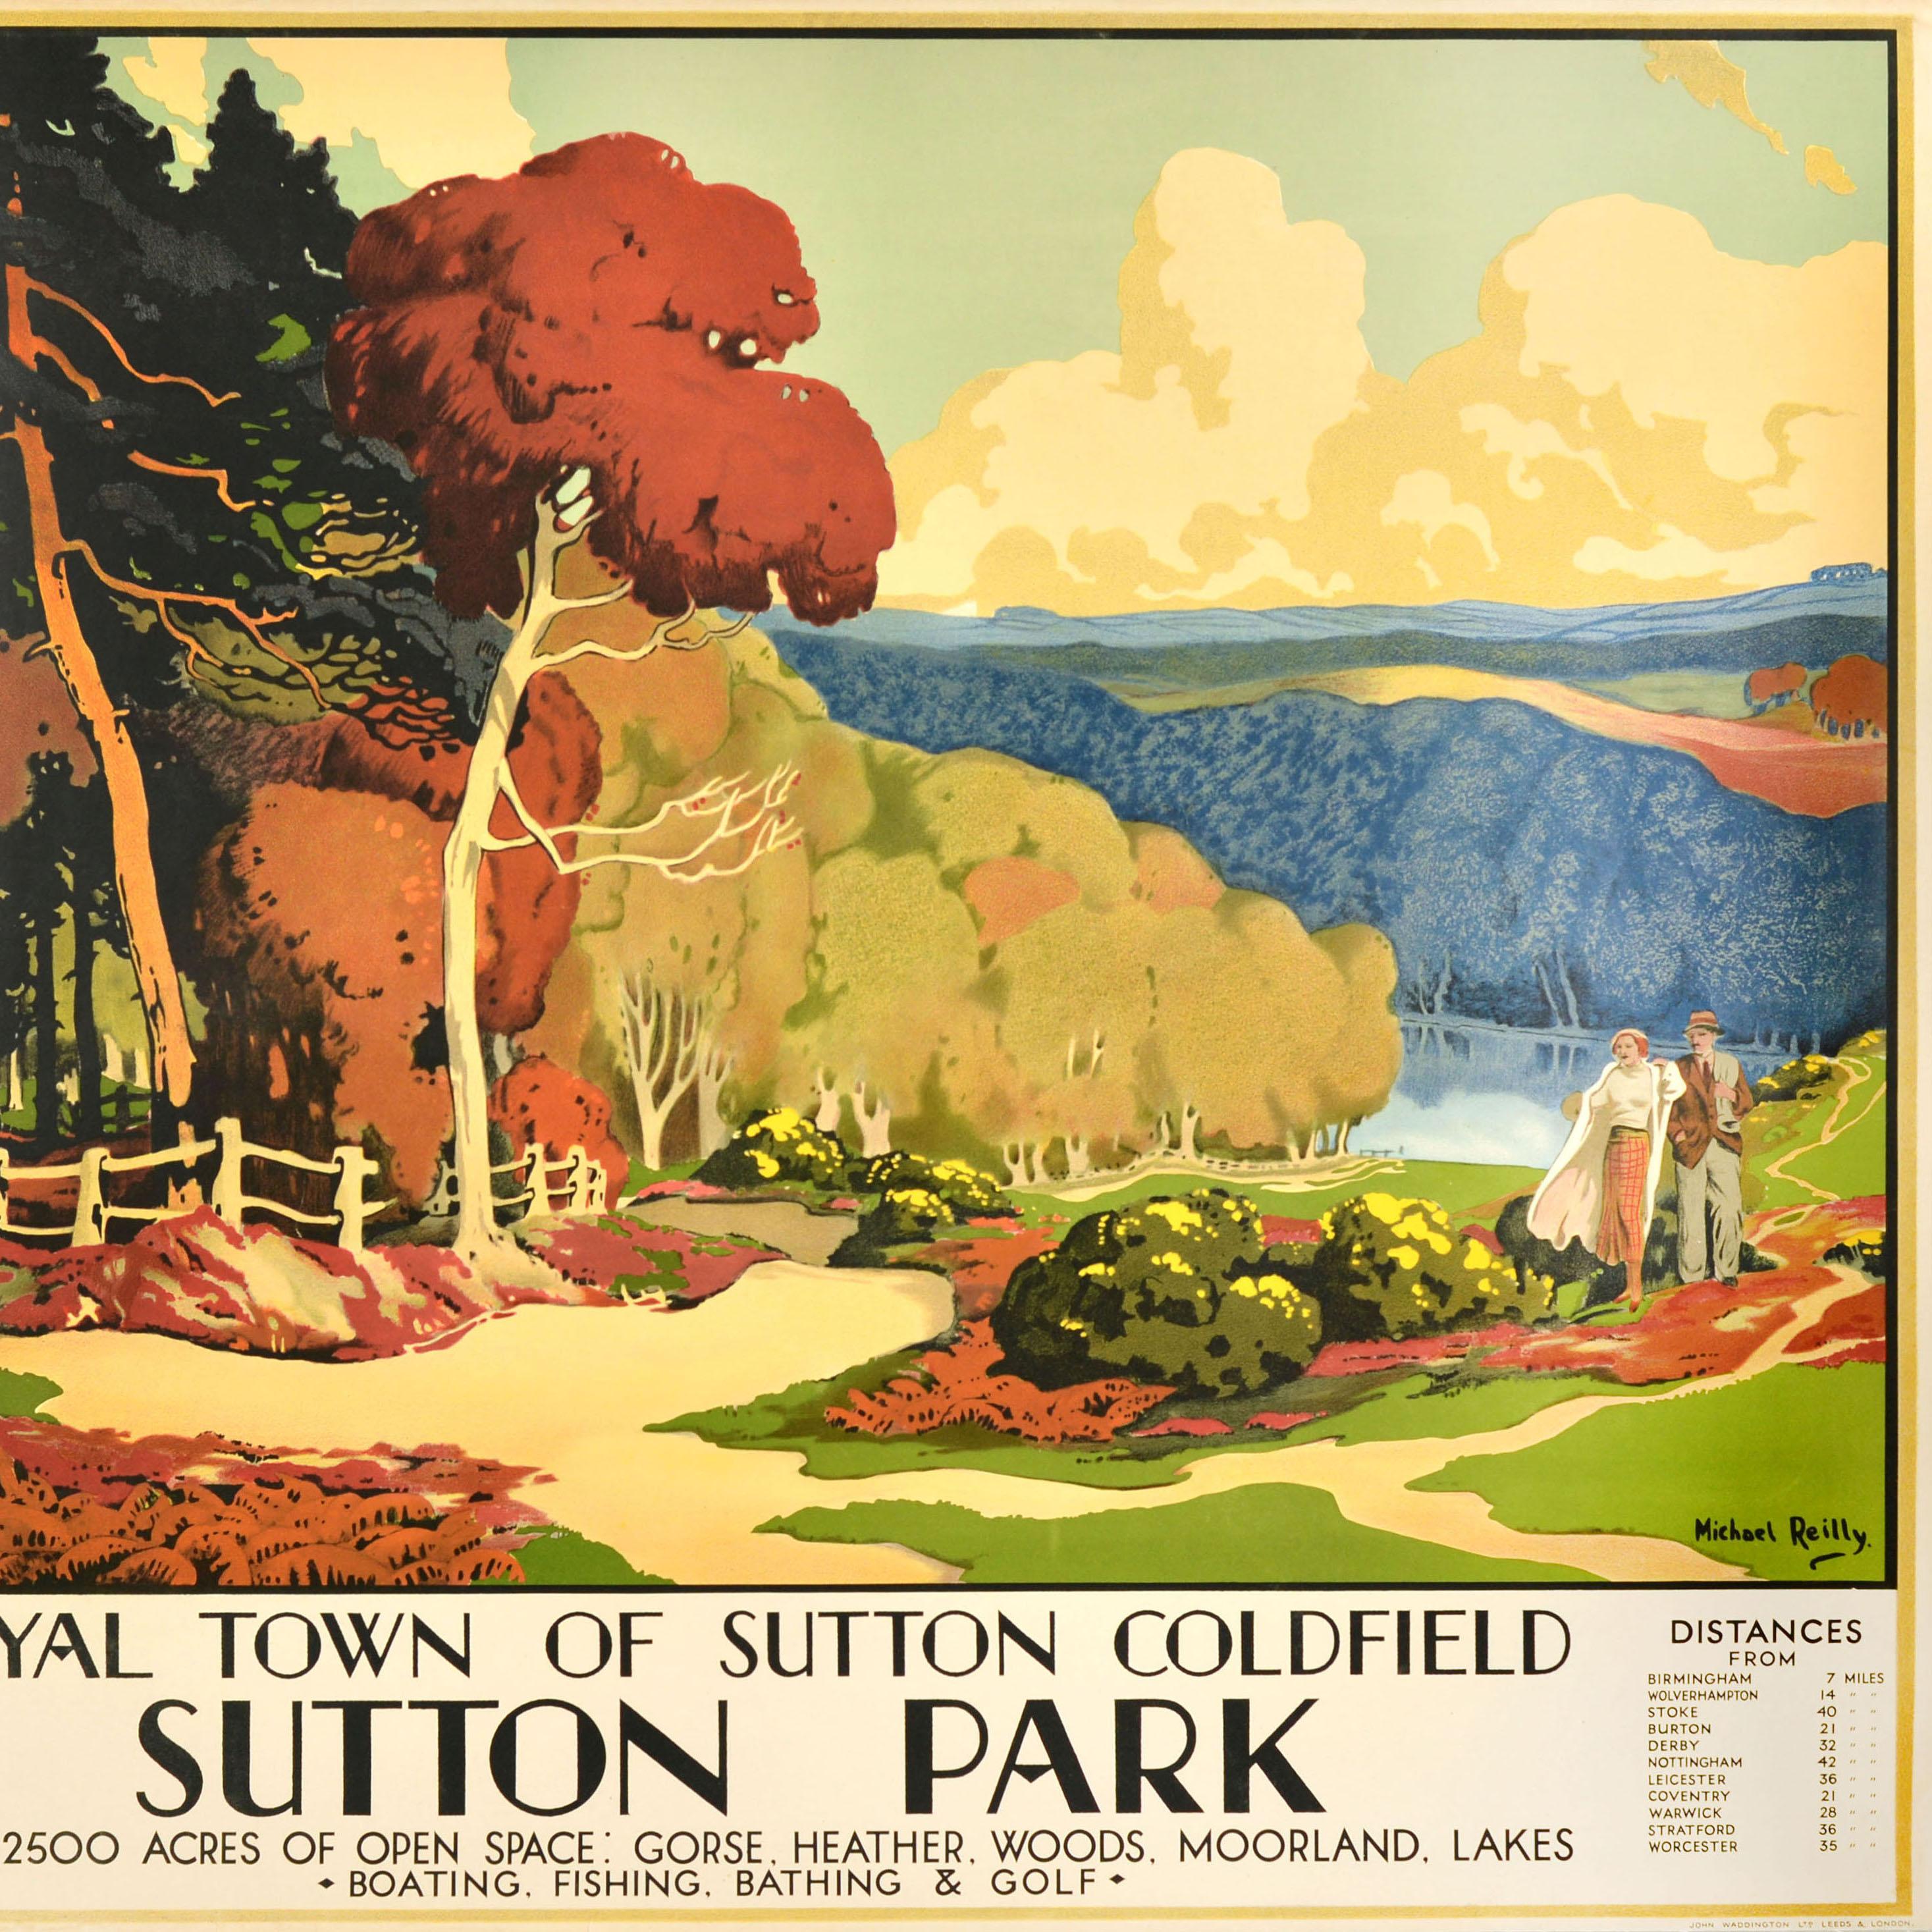 Original Vintage Travel Poster Royal Town Of Sutton Coldfield Sutton Park UK Art In Good Condition For Sale In London, GB